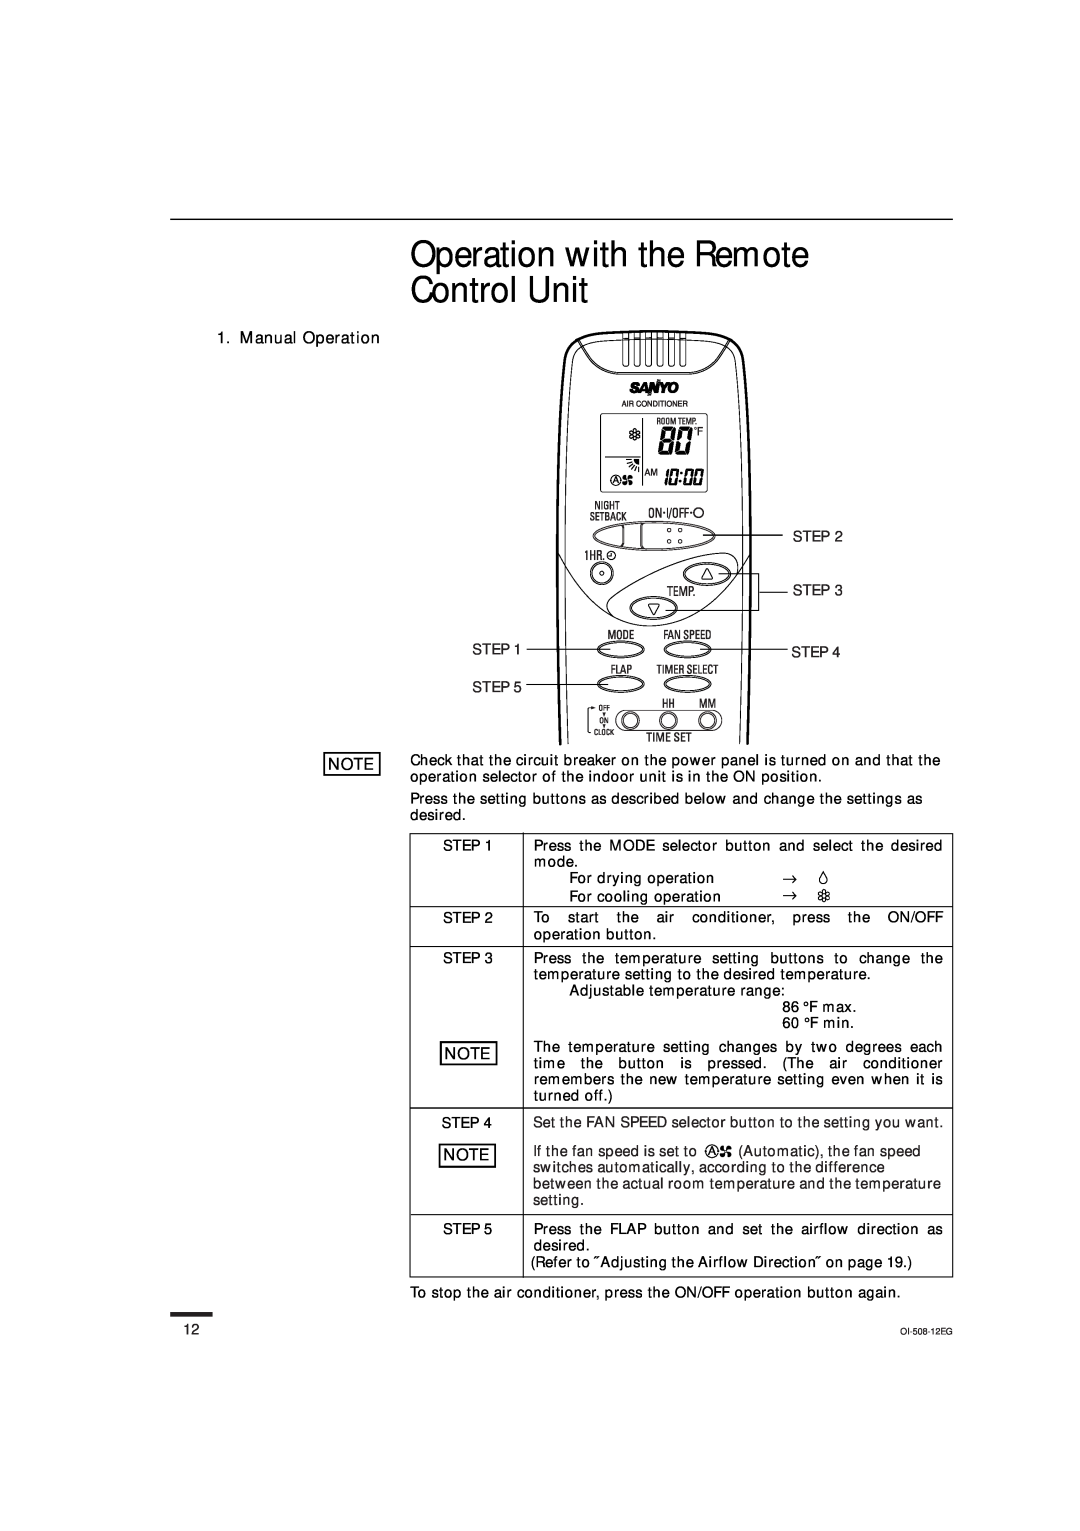 Sanyo KS2462R instruction manual Operation with the Remote Control Unit, Step Step 